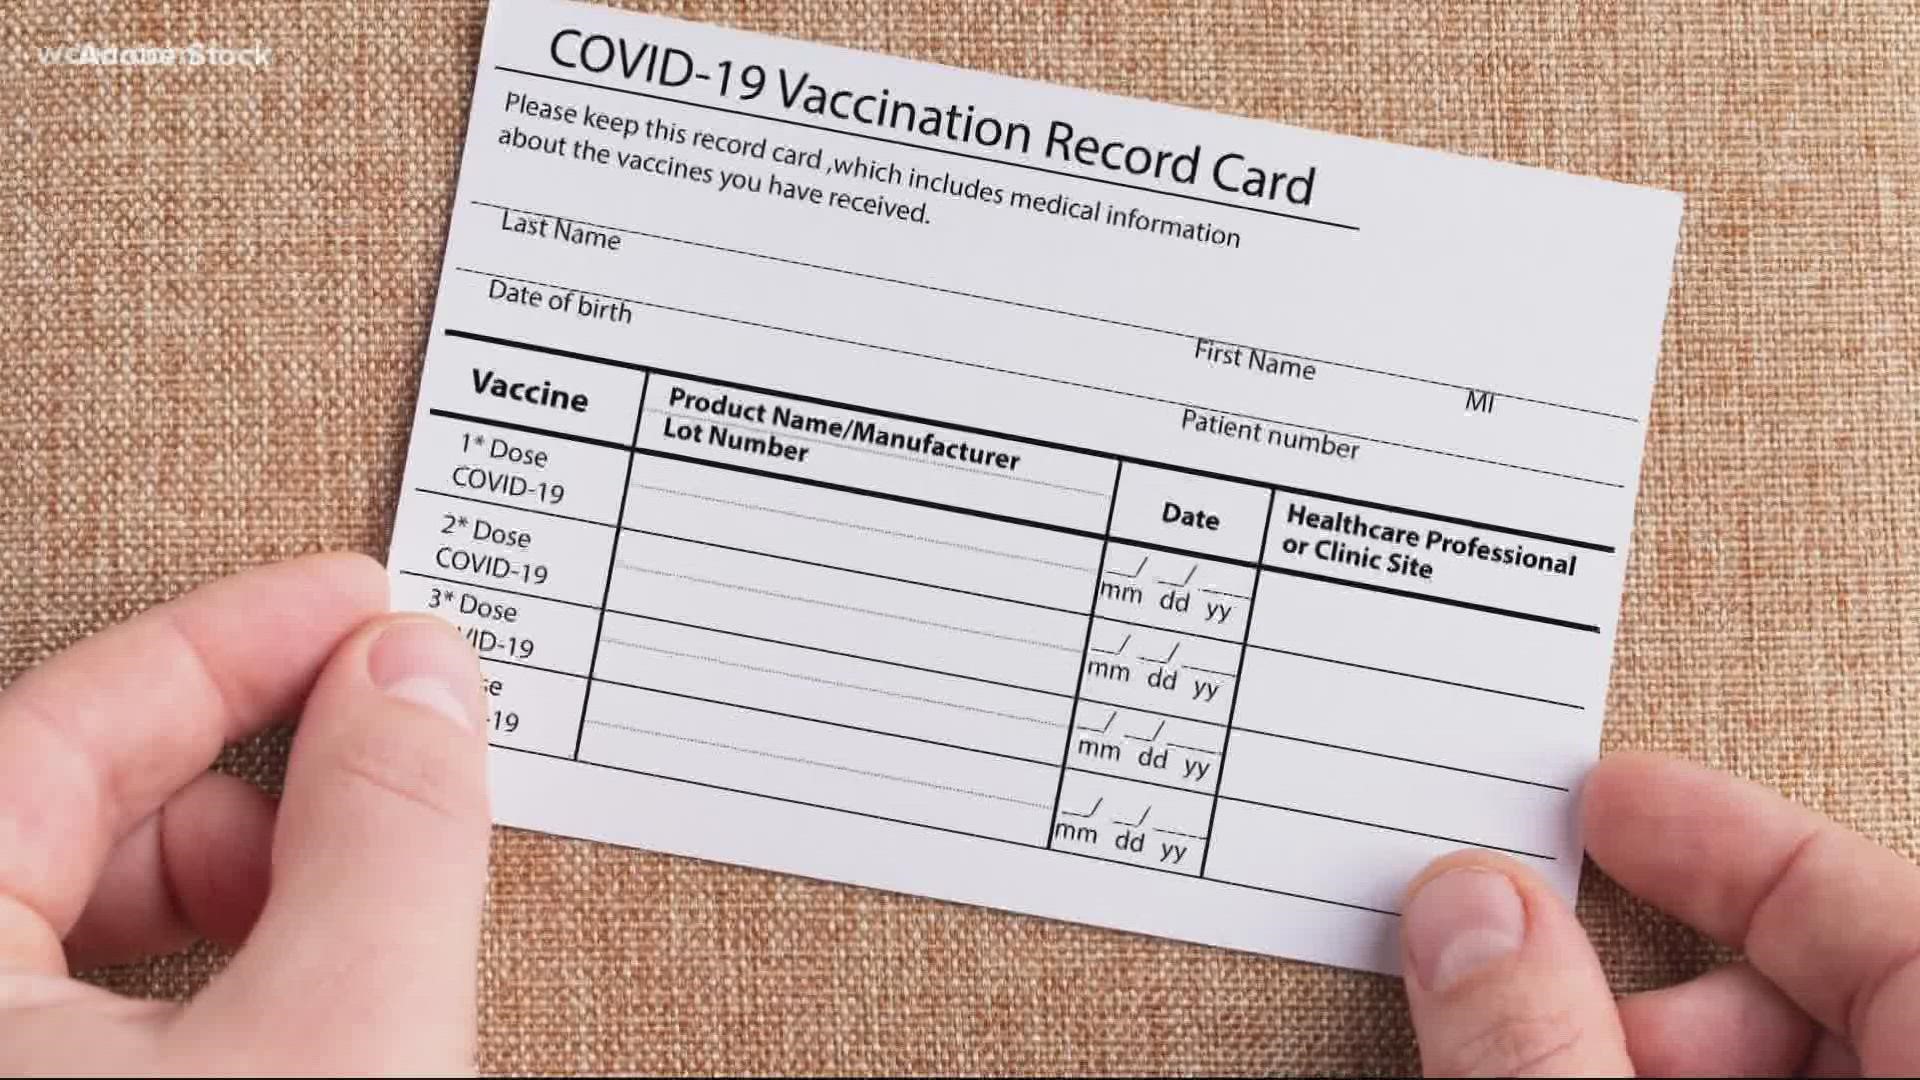 The COVID-19 vaccine is not required for students but it is recommended for children 12 and older. We look into if schools will have a record of the shot.